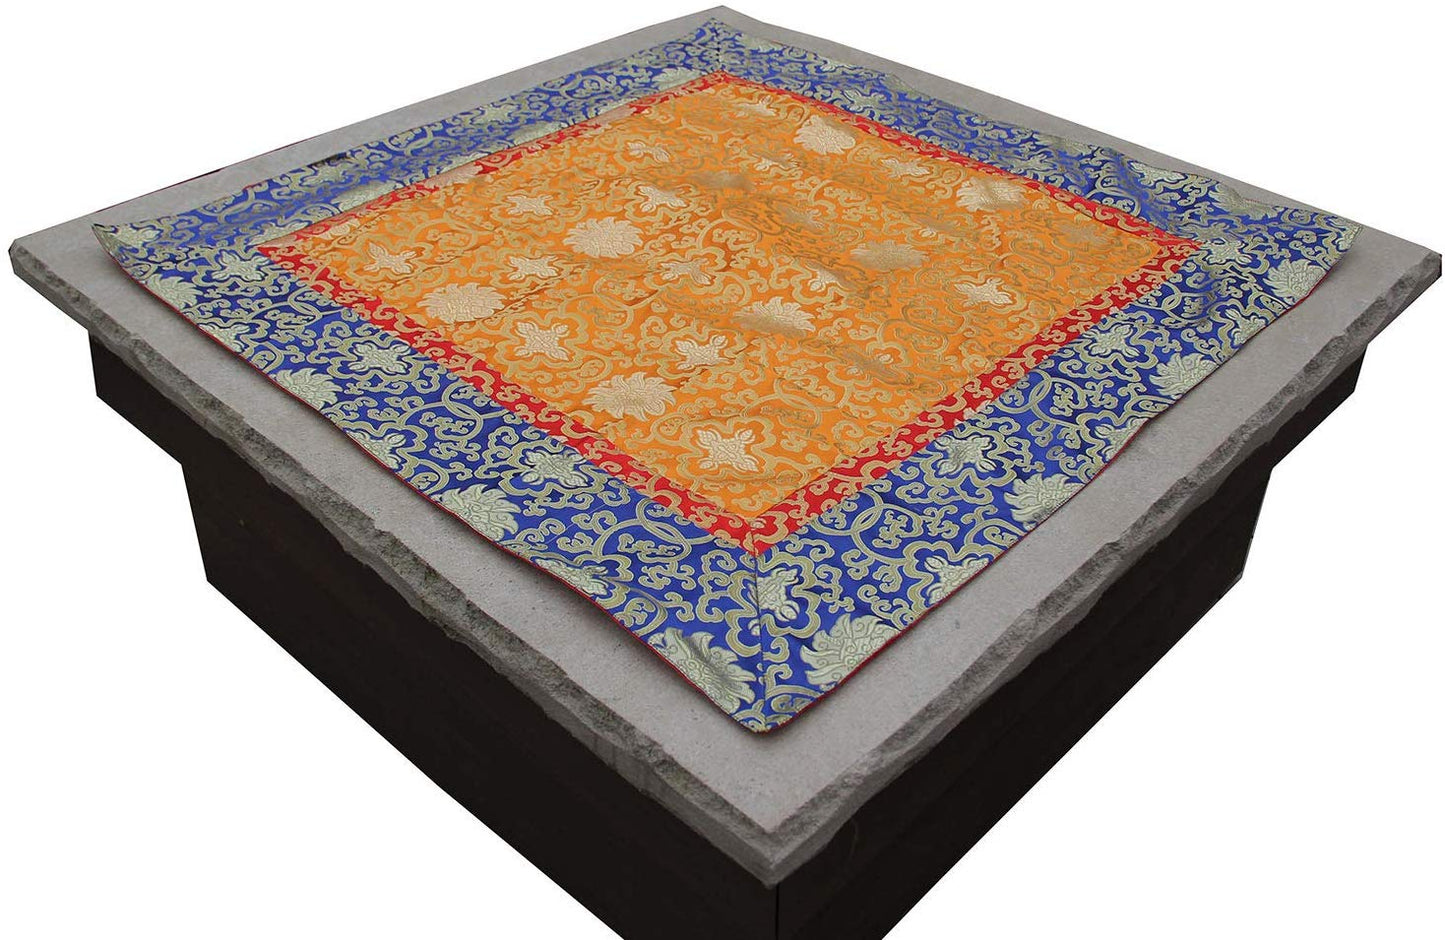 Tibetan Lotus Silk Brocade Table Runner/Shrine Cover/Altar Cloth/Table Cover (38 X 38 Inches) - DharmaObjects